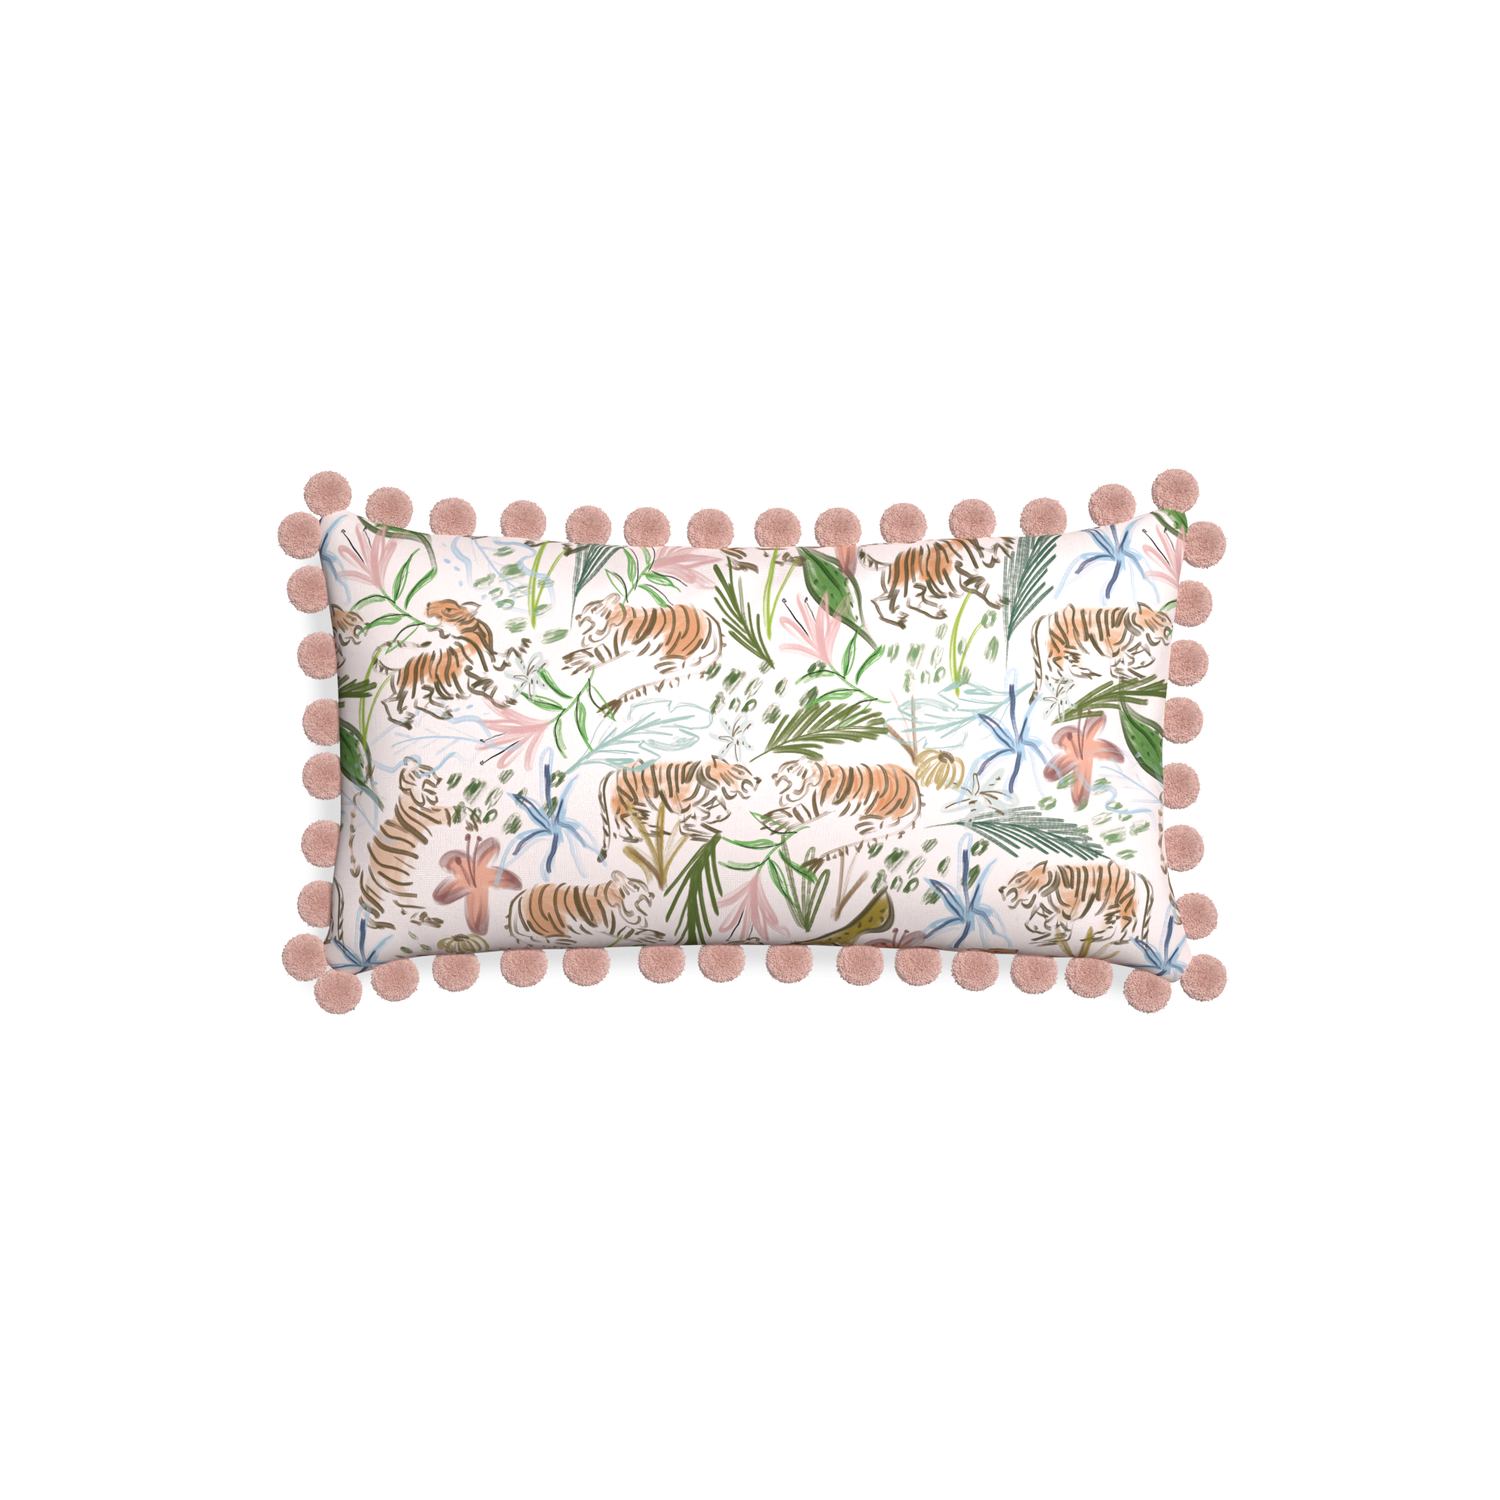 Petite-lumbar frida pink custom pink chinoiserie tigerpillow with rose pom pom on white background